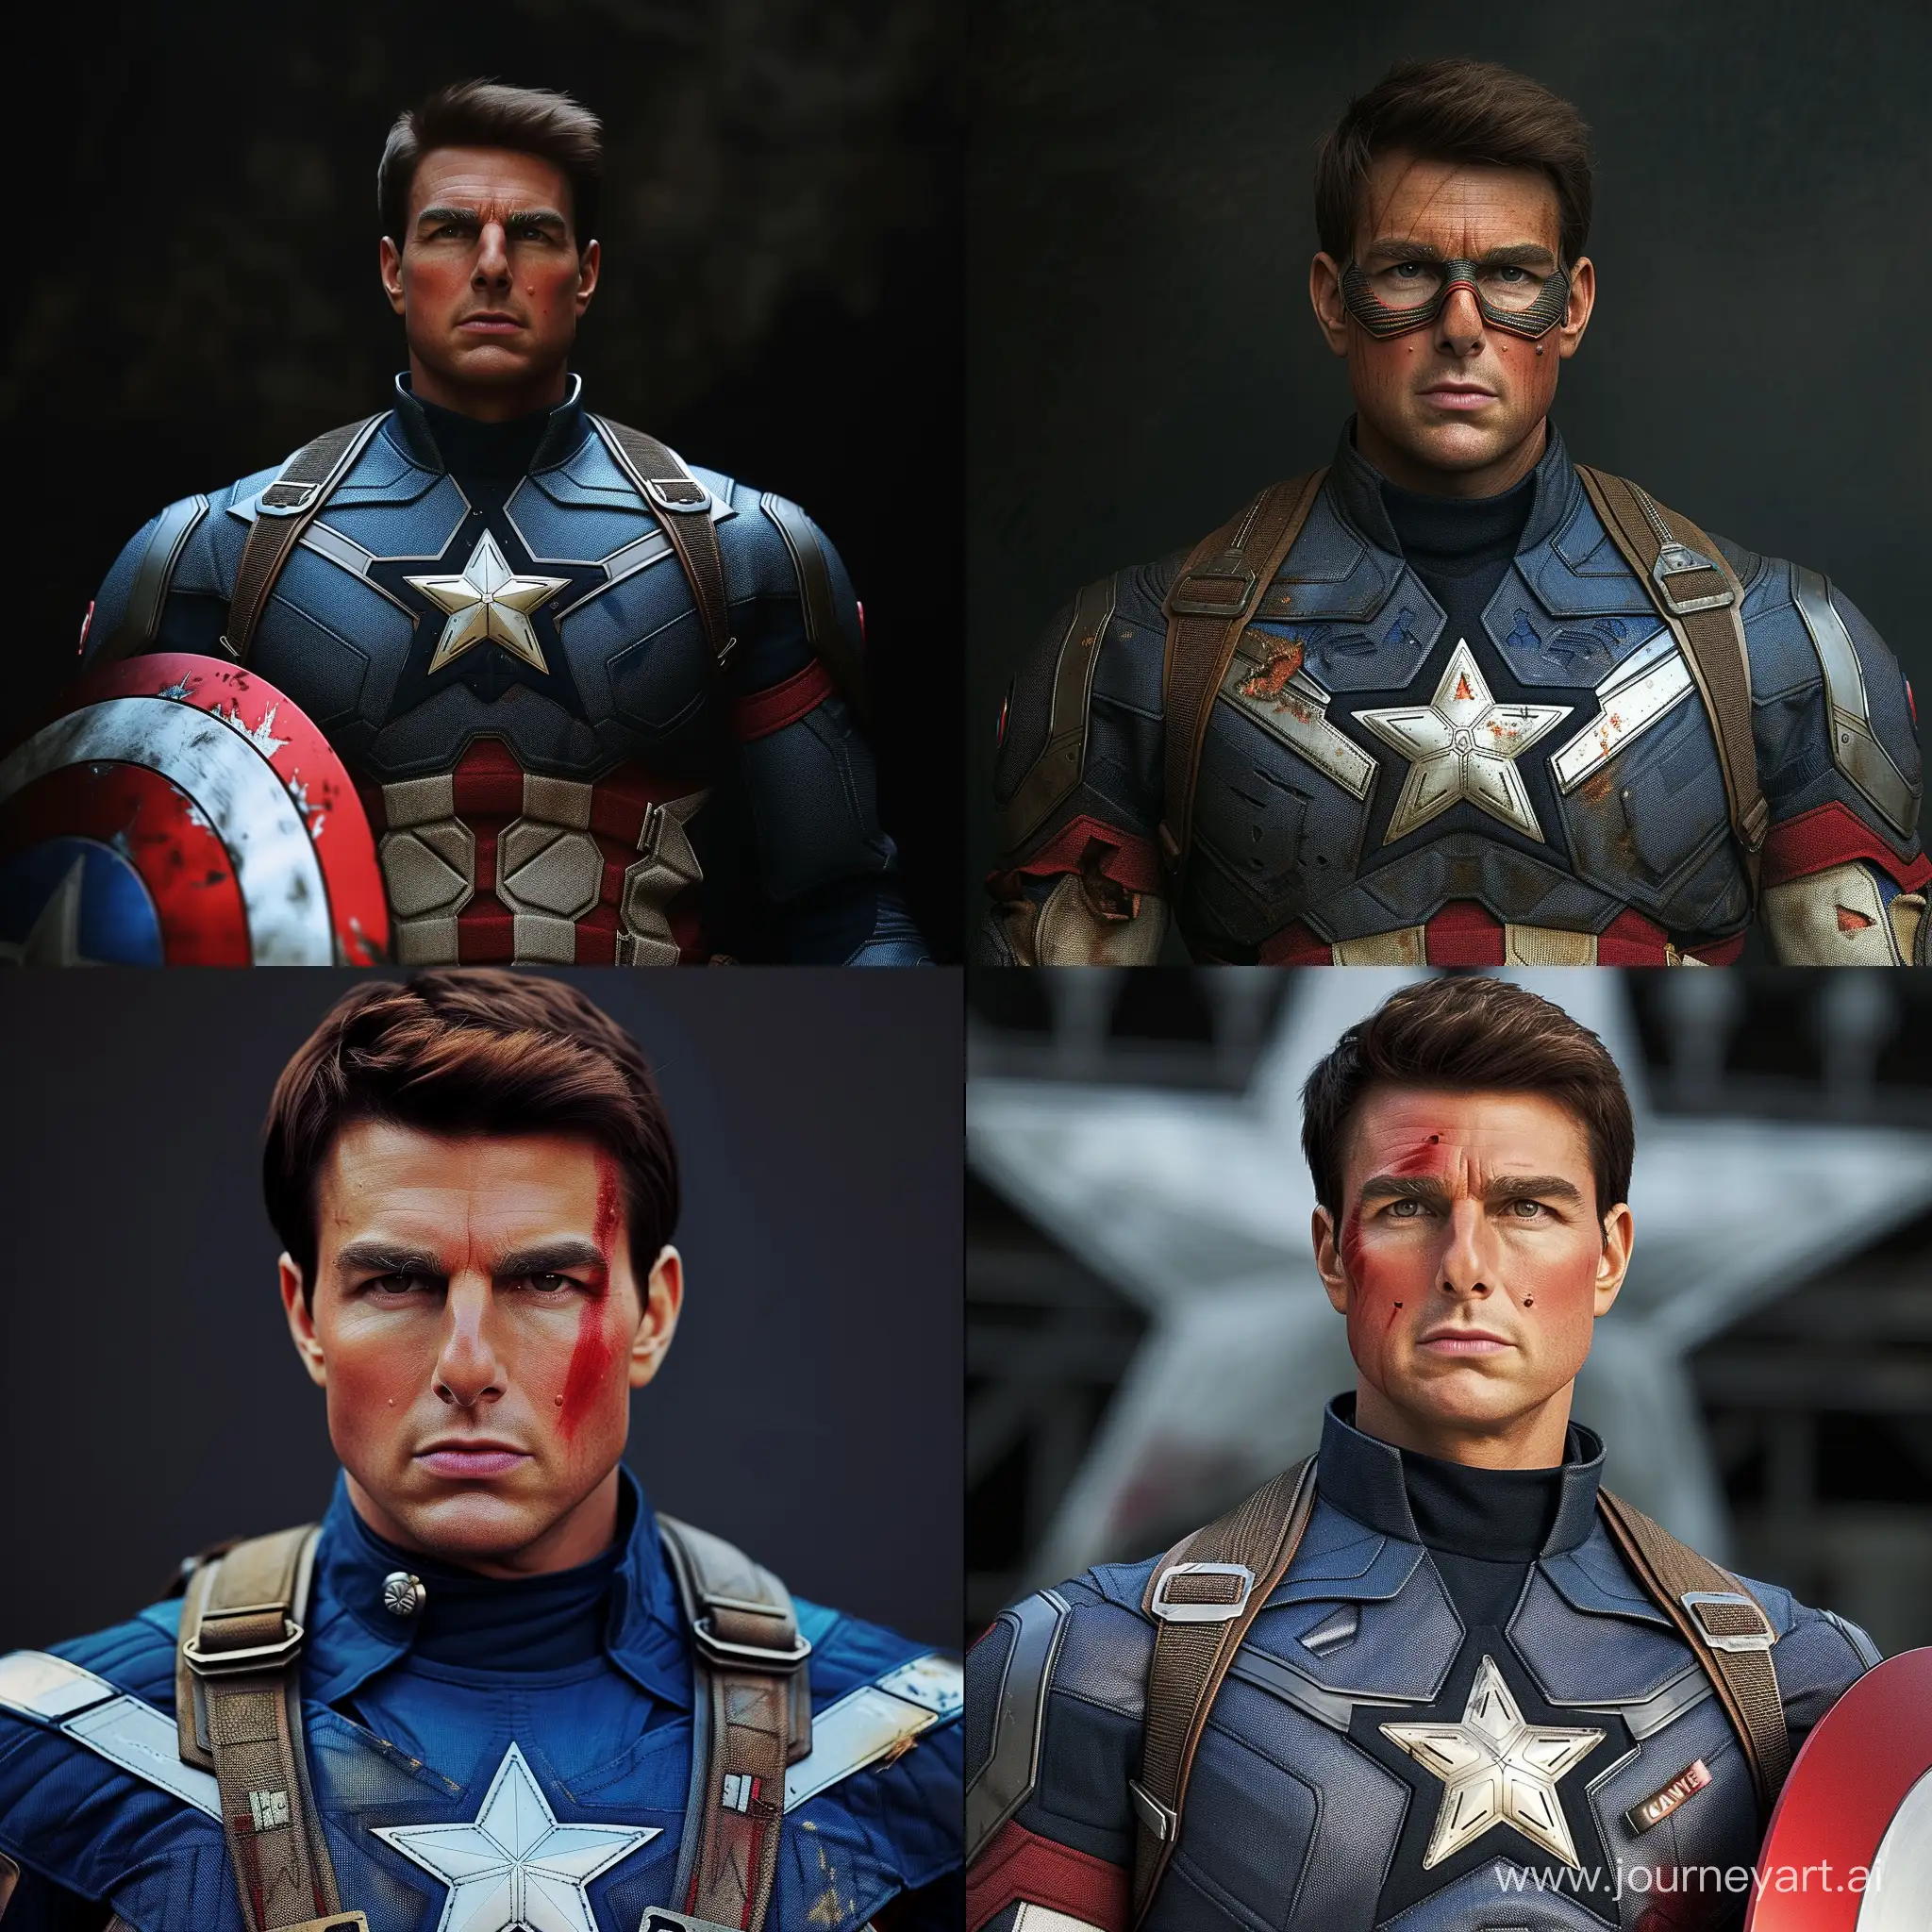 Tom-Cruise-Portraying-Captain-America-in-UltraRealistic-HighQuality-Image